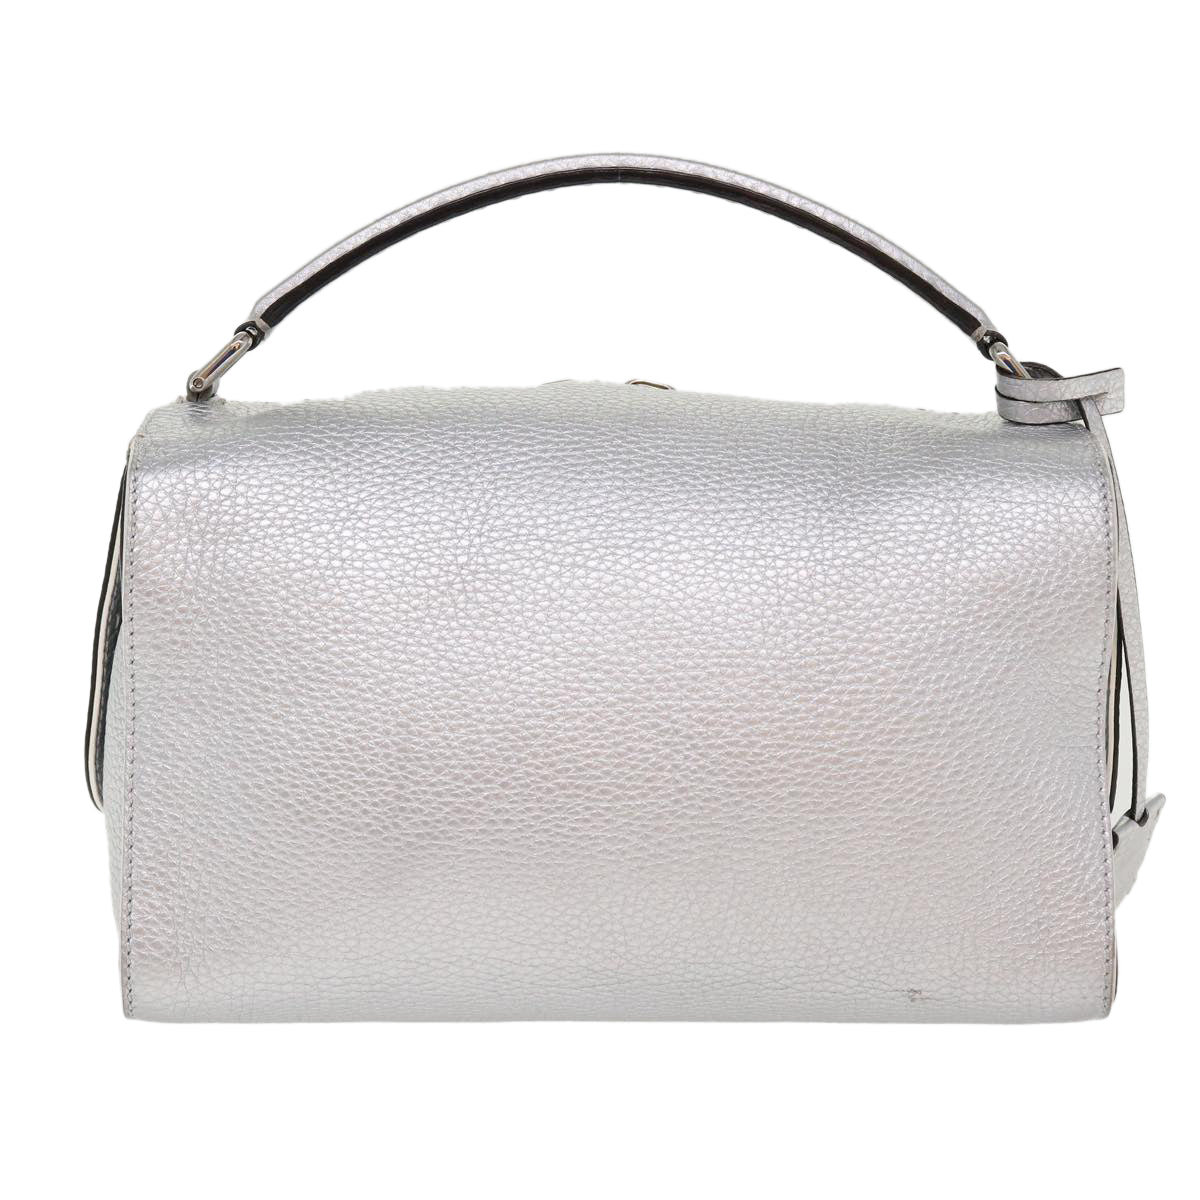 FENDI Hand Bag Leather 2way Silver Auth 38070 - 0